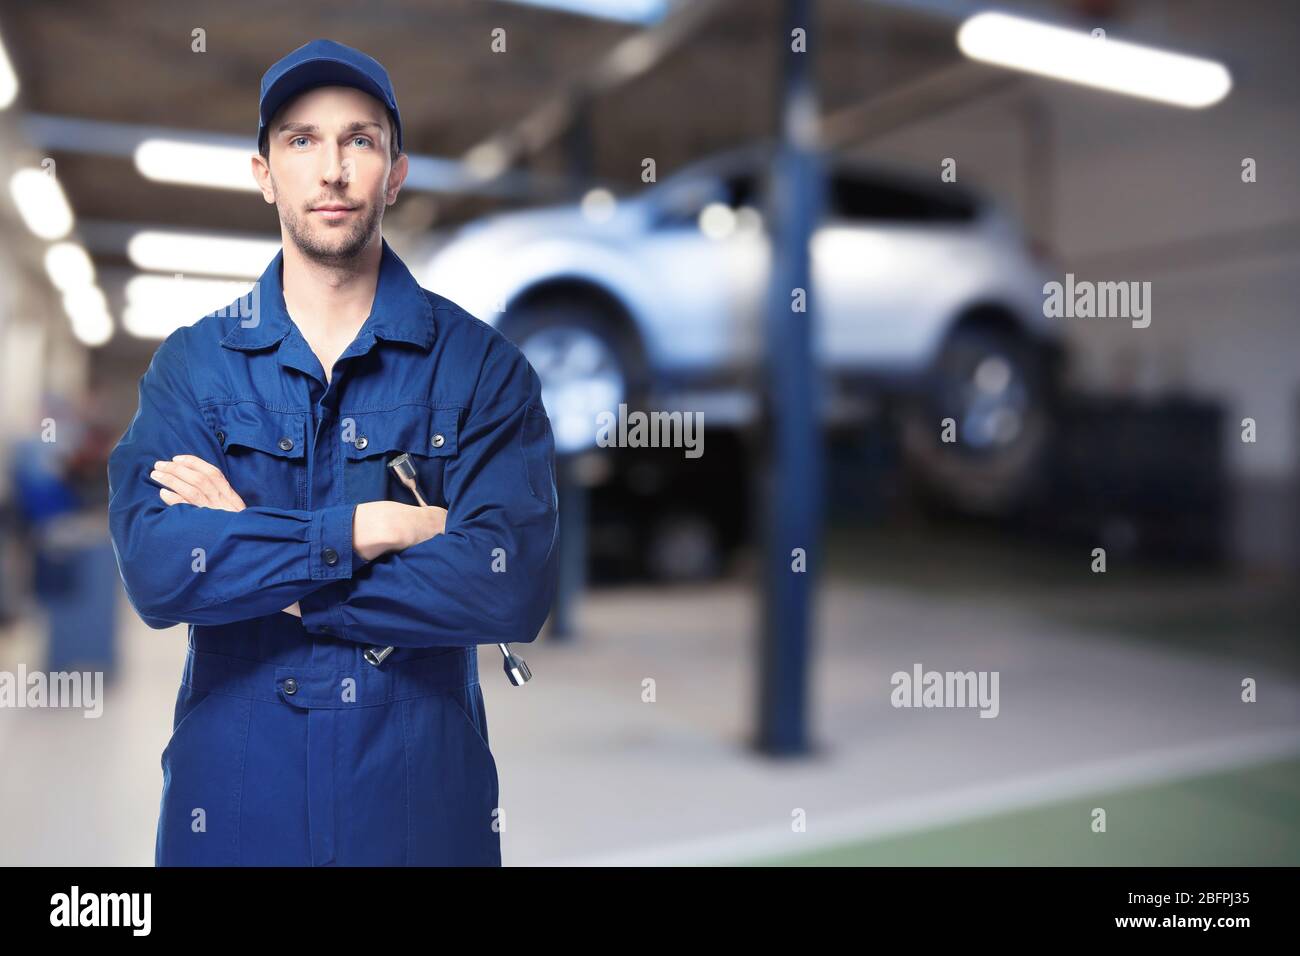 Auto mechanic with tool and workshop on background. Car service concept Stock Photo